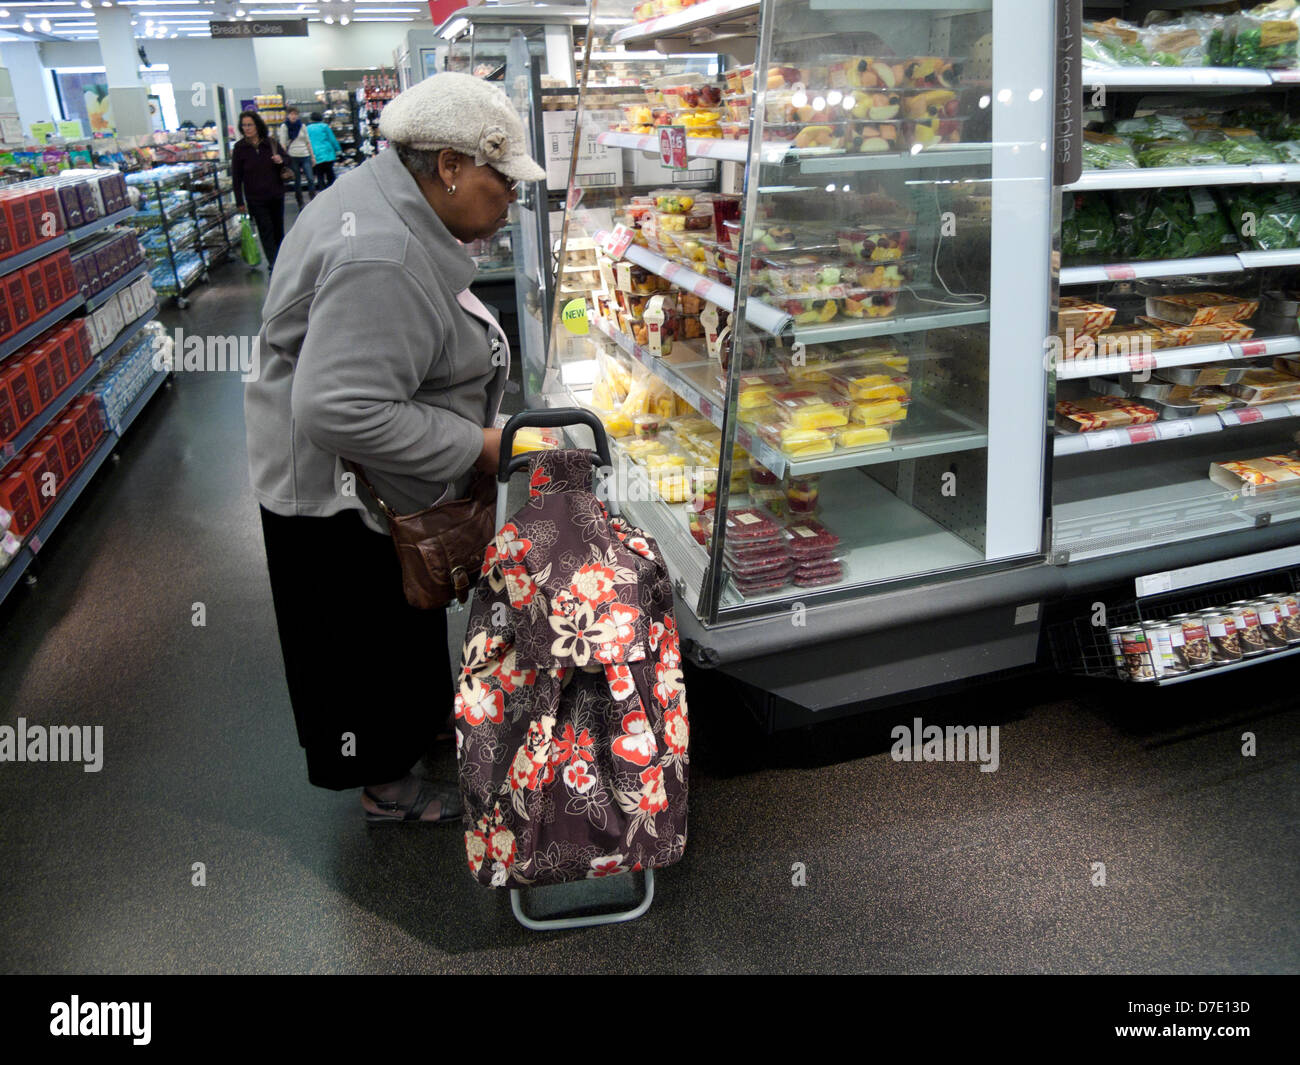 Elderly black woman shopper shopping for food looking at fruit display with a shopping bag trolley Marks & Spencer store Cardiff Wales UK KATHY DEWITT Stock Photo